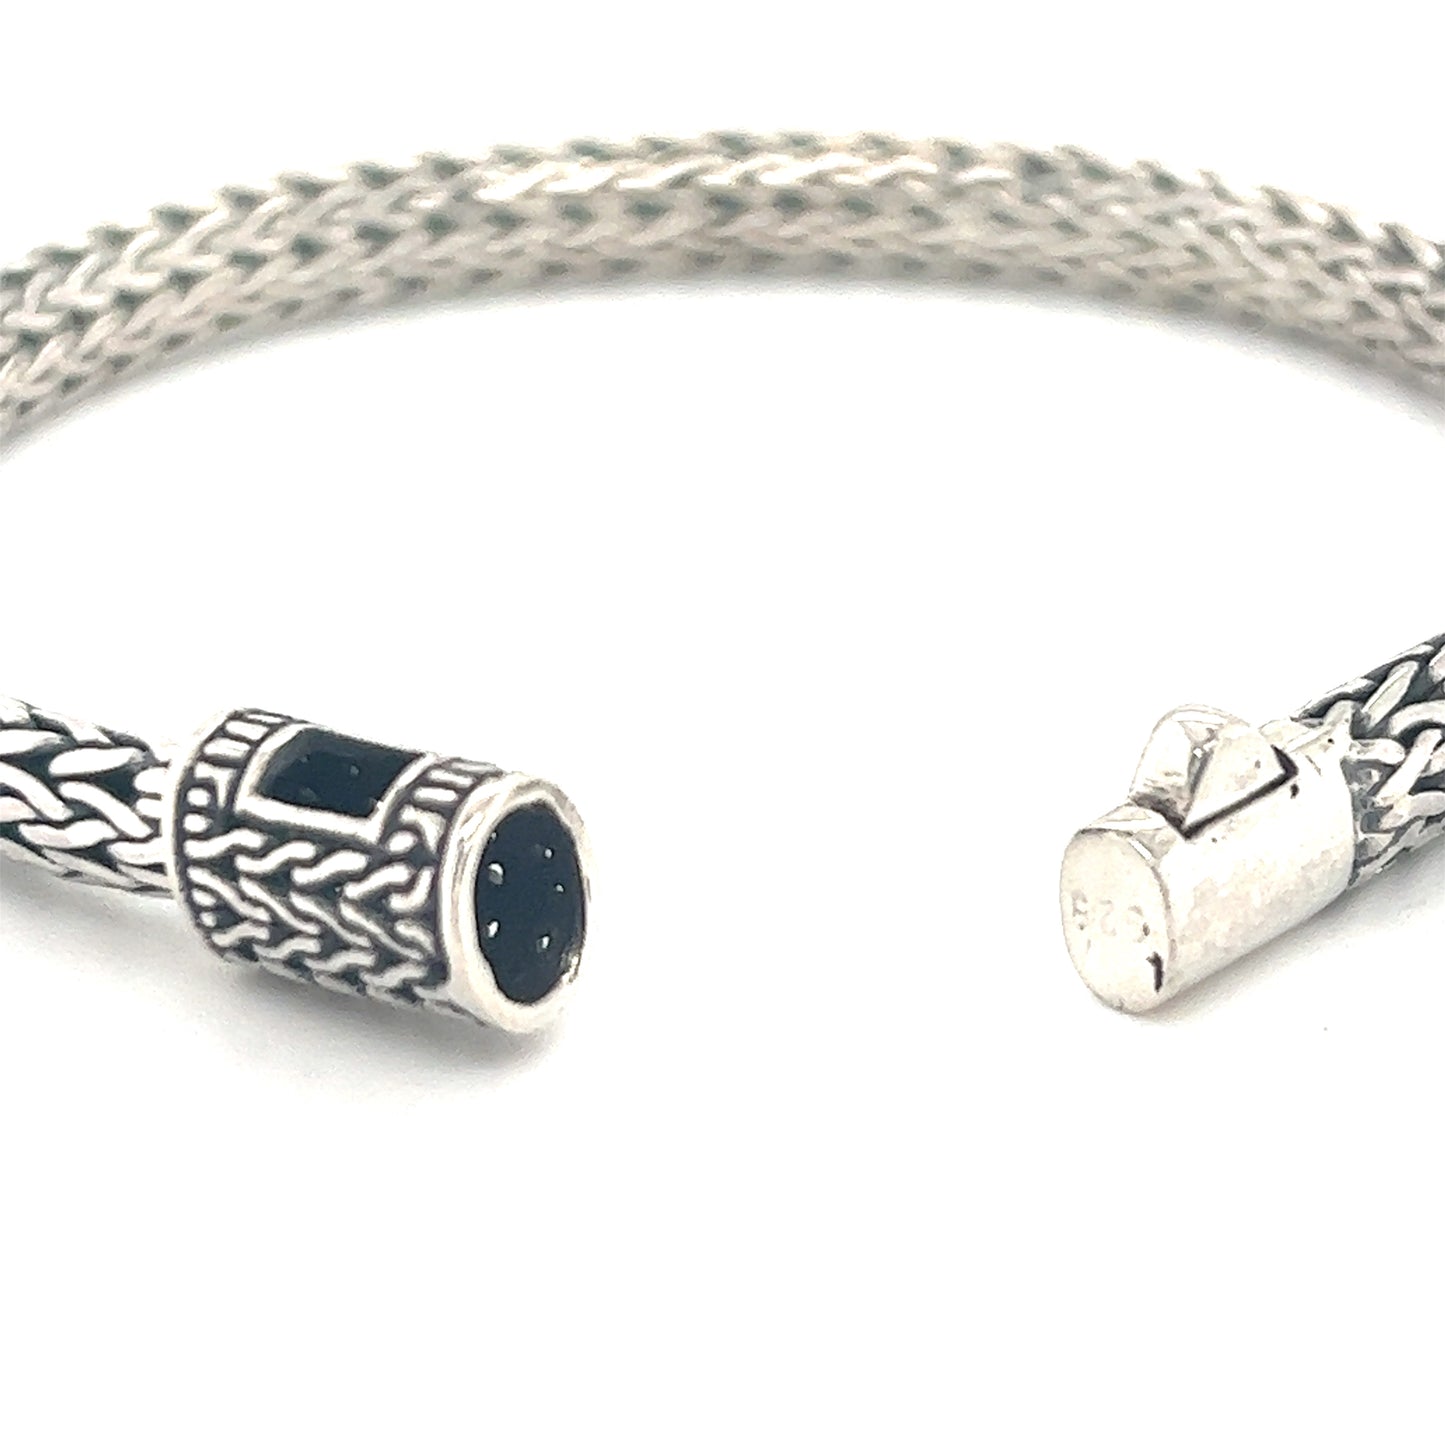 A comfortable 4X6MM Braided Rope Bracelet by Super Silver with a black stone on it.